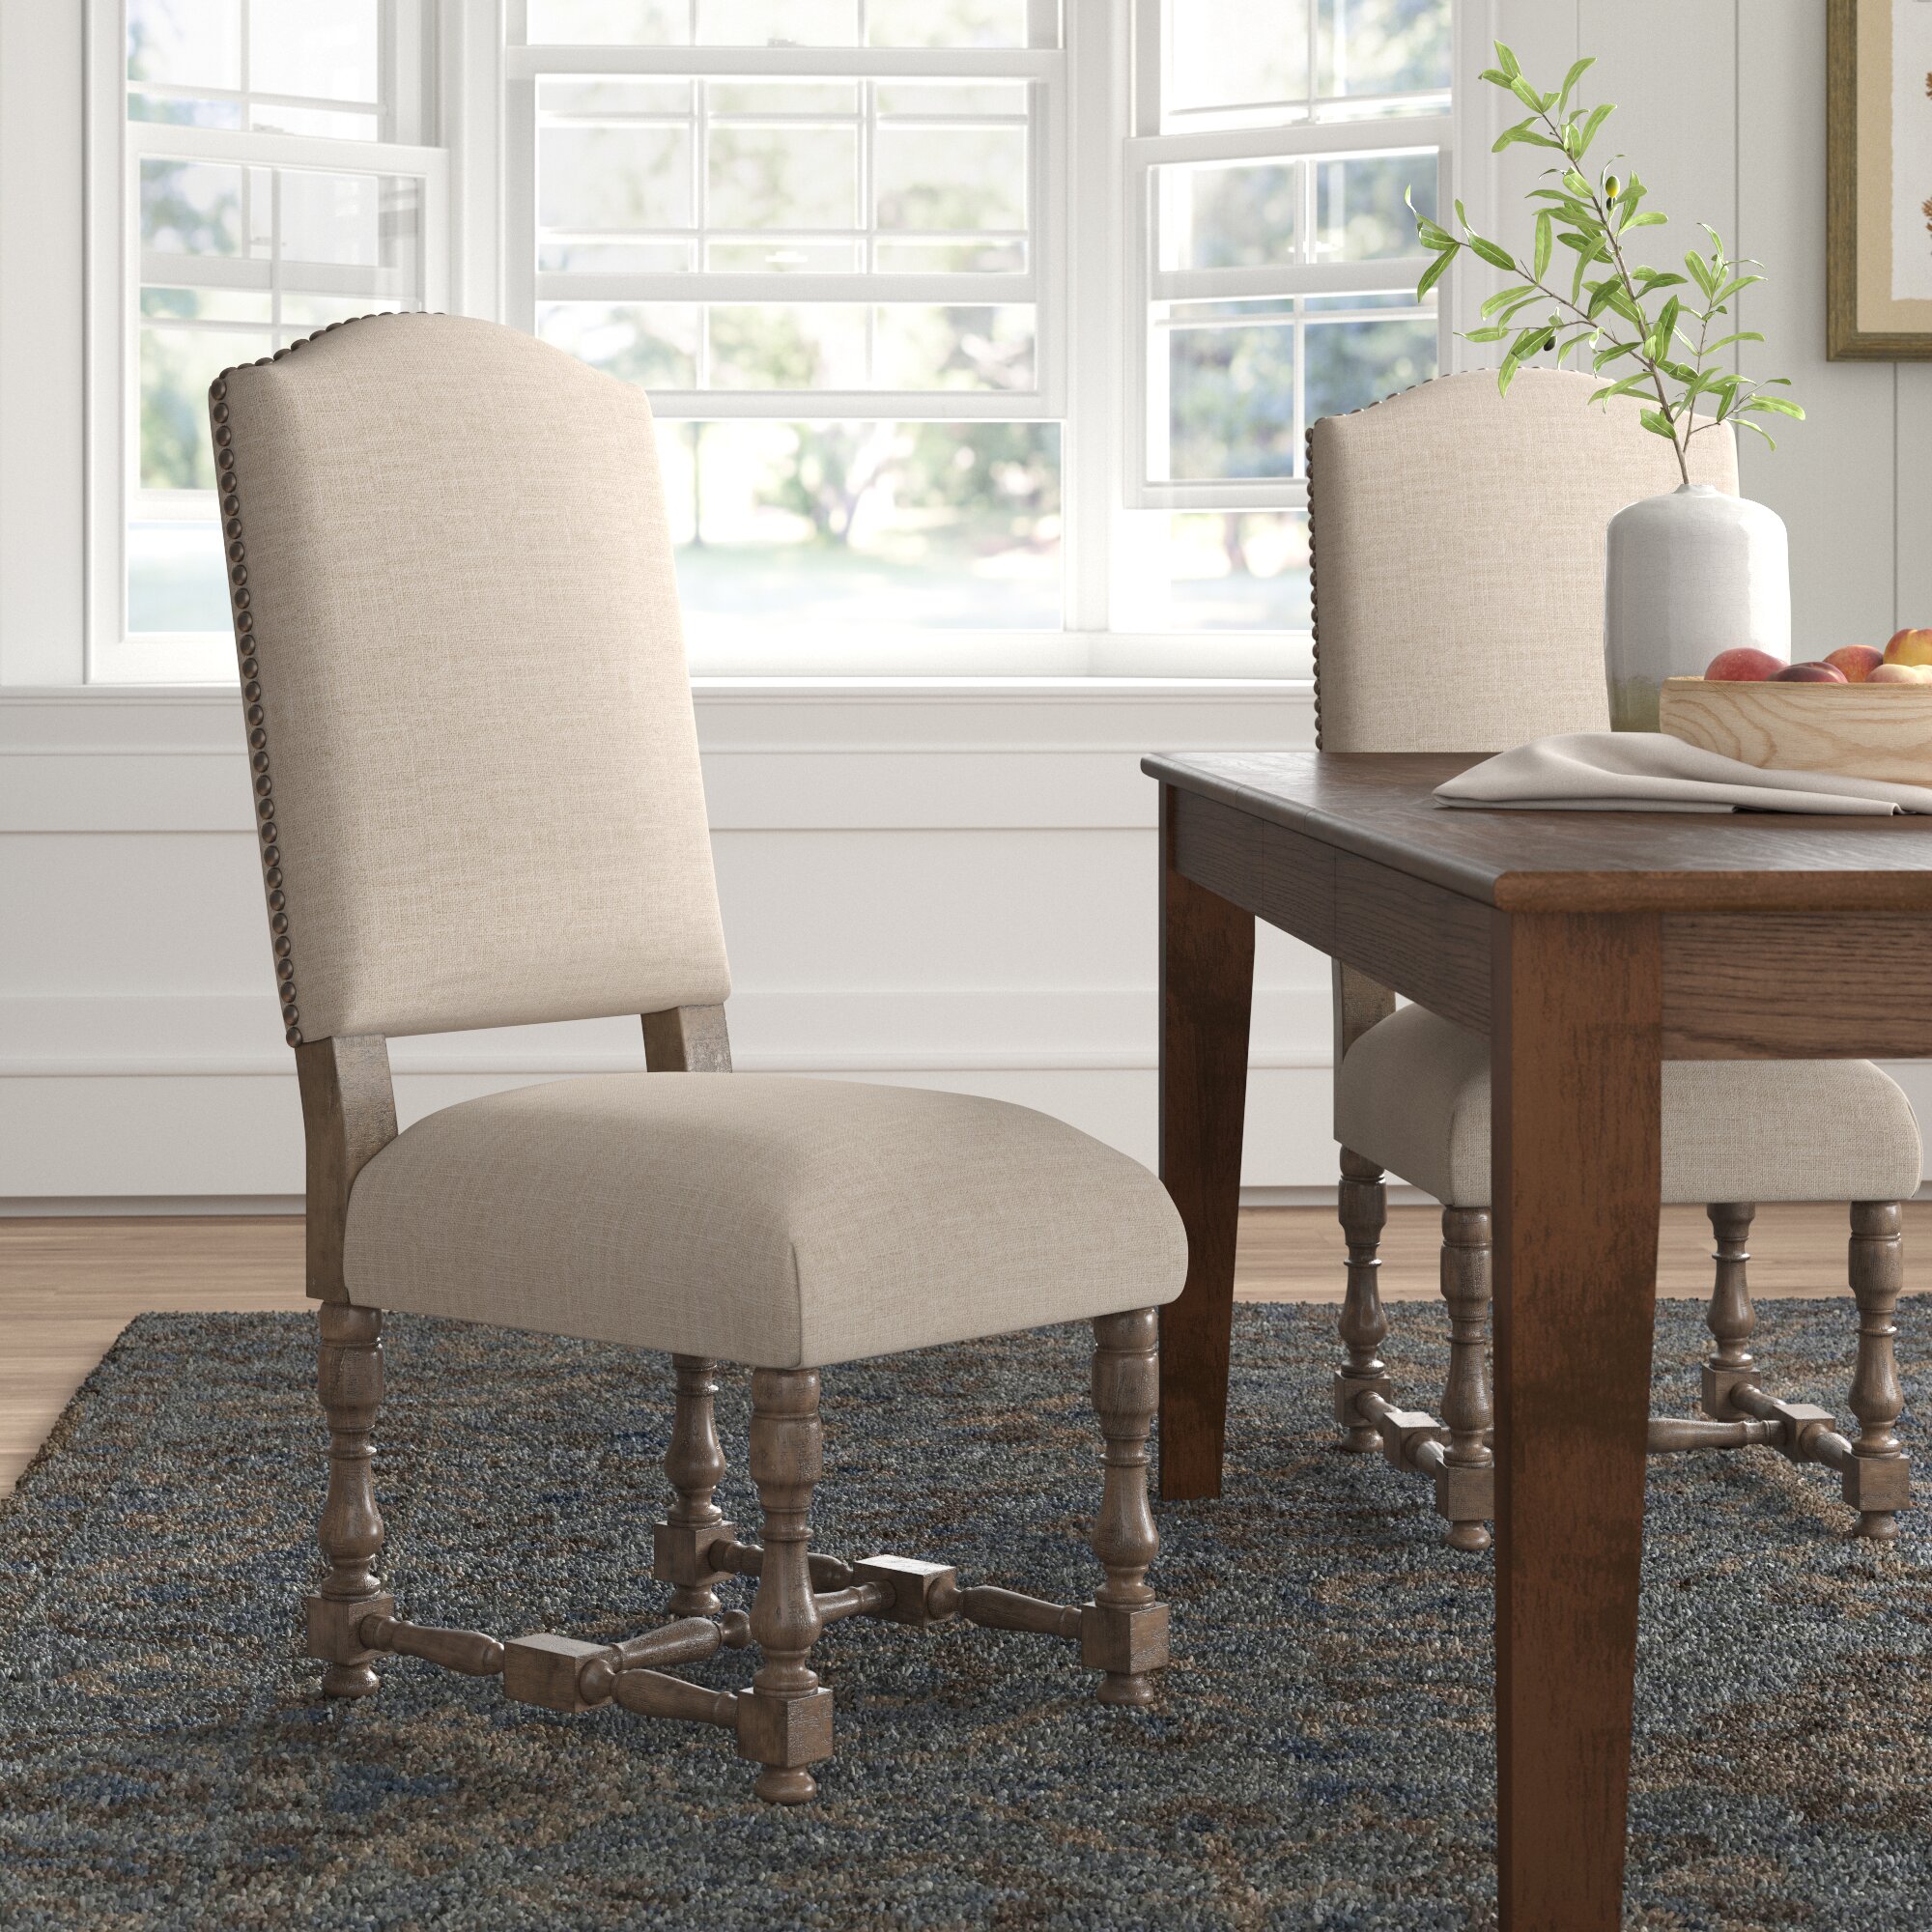 Tufted Dining Chairs With Nailheads - Gymax Set Of 4 Beige Tufted